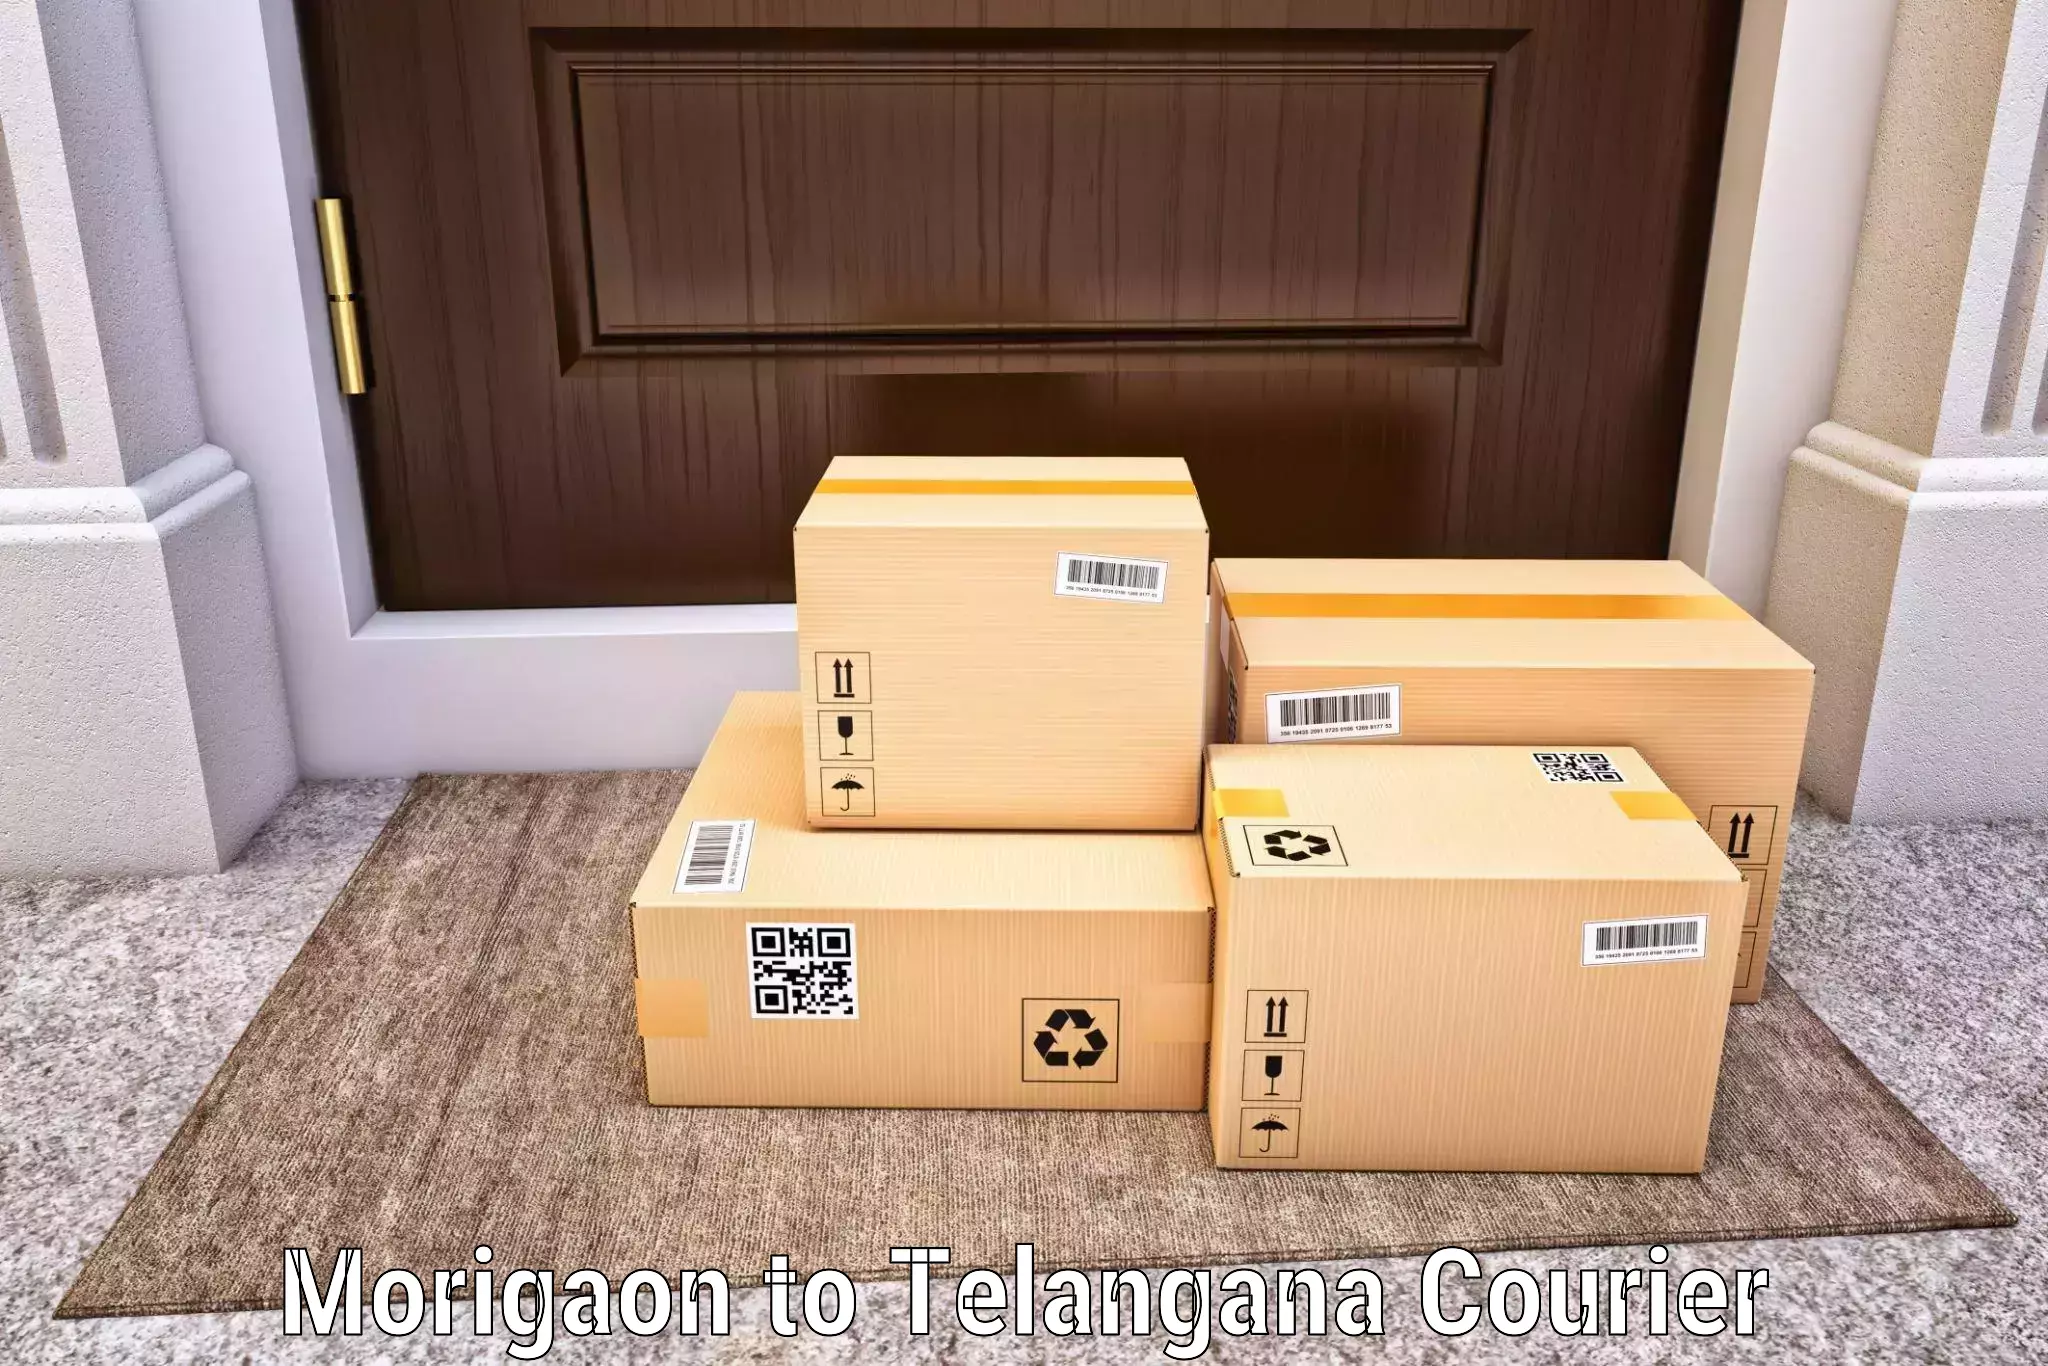 Easy access courier services Morigaon to Amangal